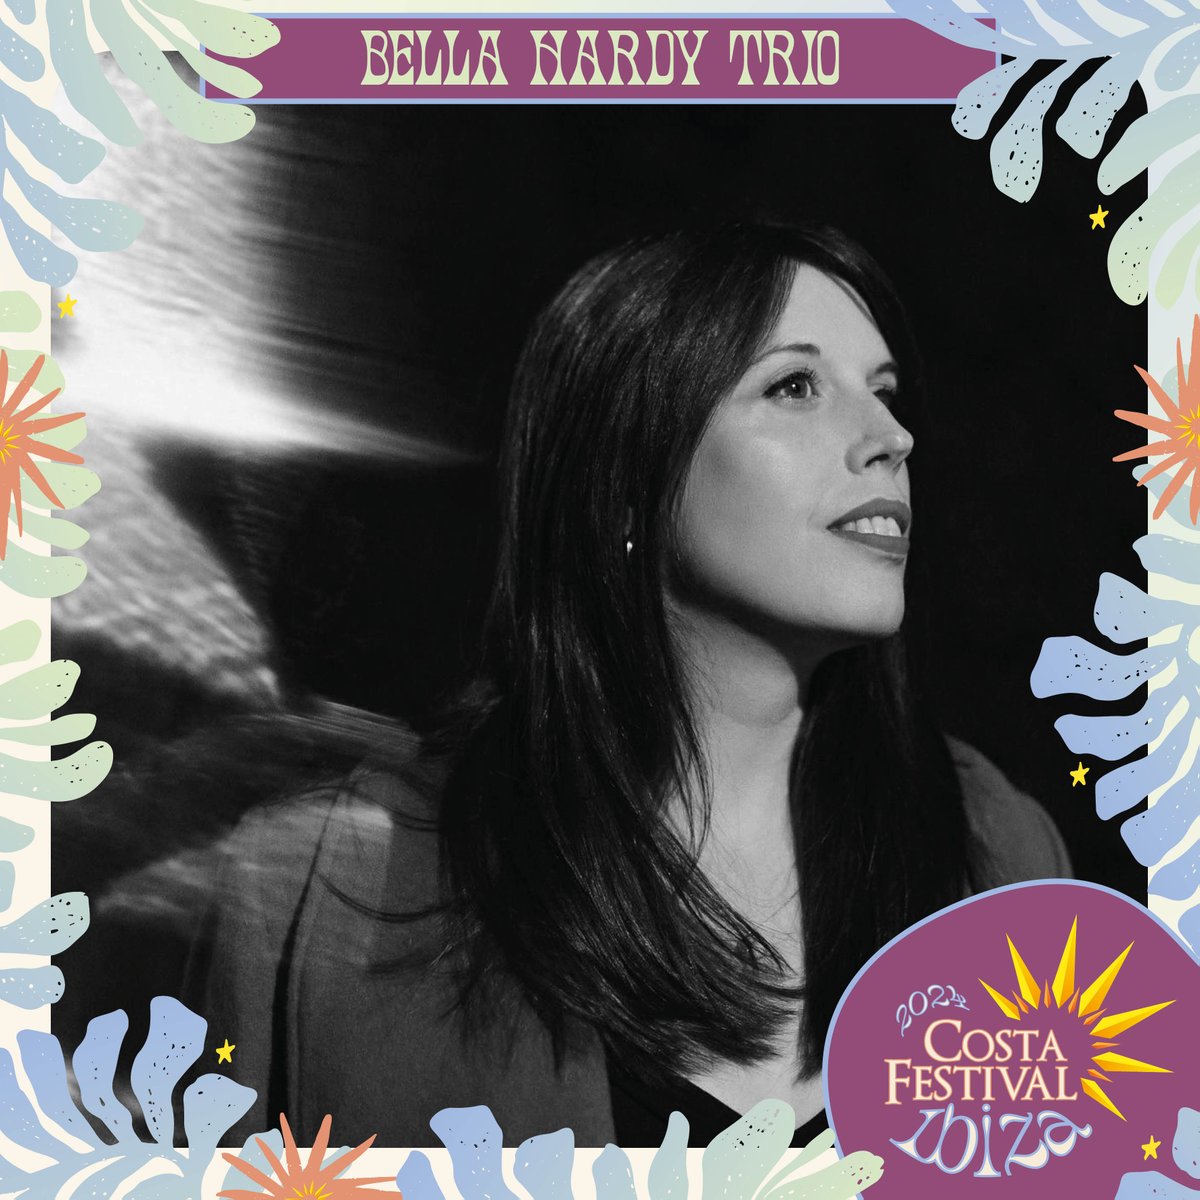 Have you heard Bella Hardy’s Love Songs?❤️ We are thrilled that she’s joining us at Costa Ibiza this summer, so make sure you give Love Songs a listen! bellahardy.bandcamp.com 👉costafestival.co.uk/costa-festival…